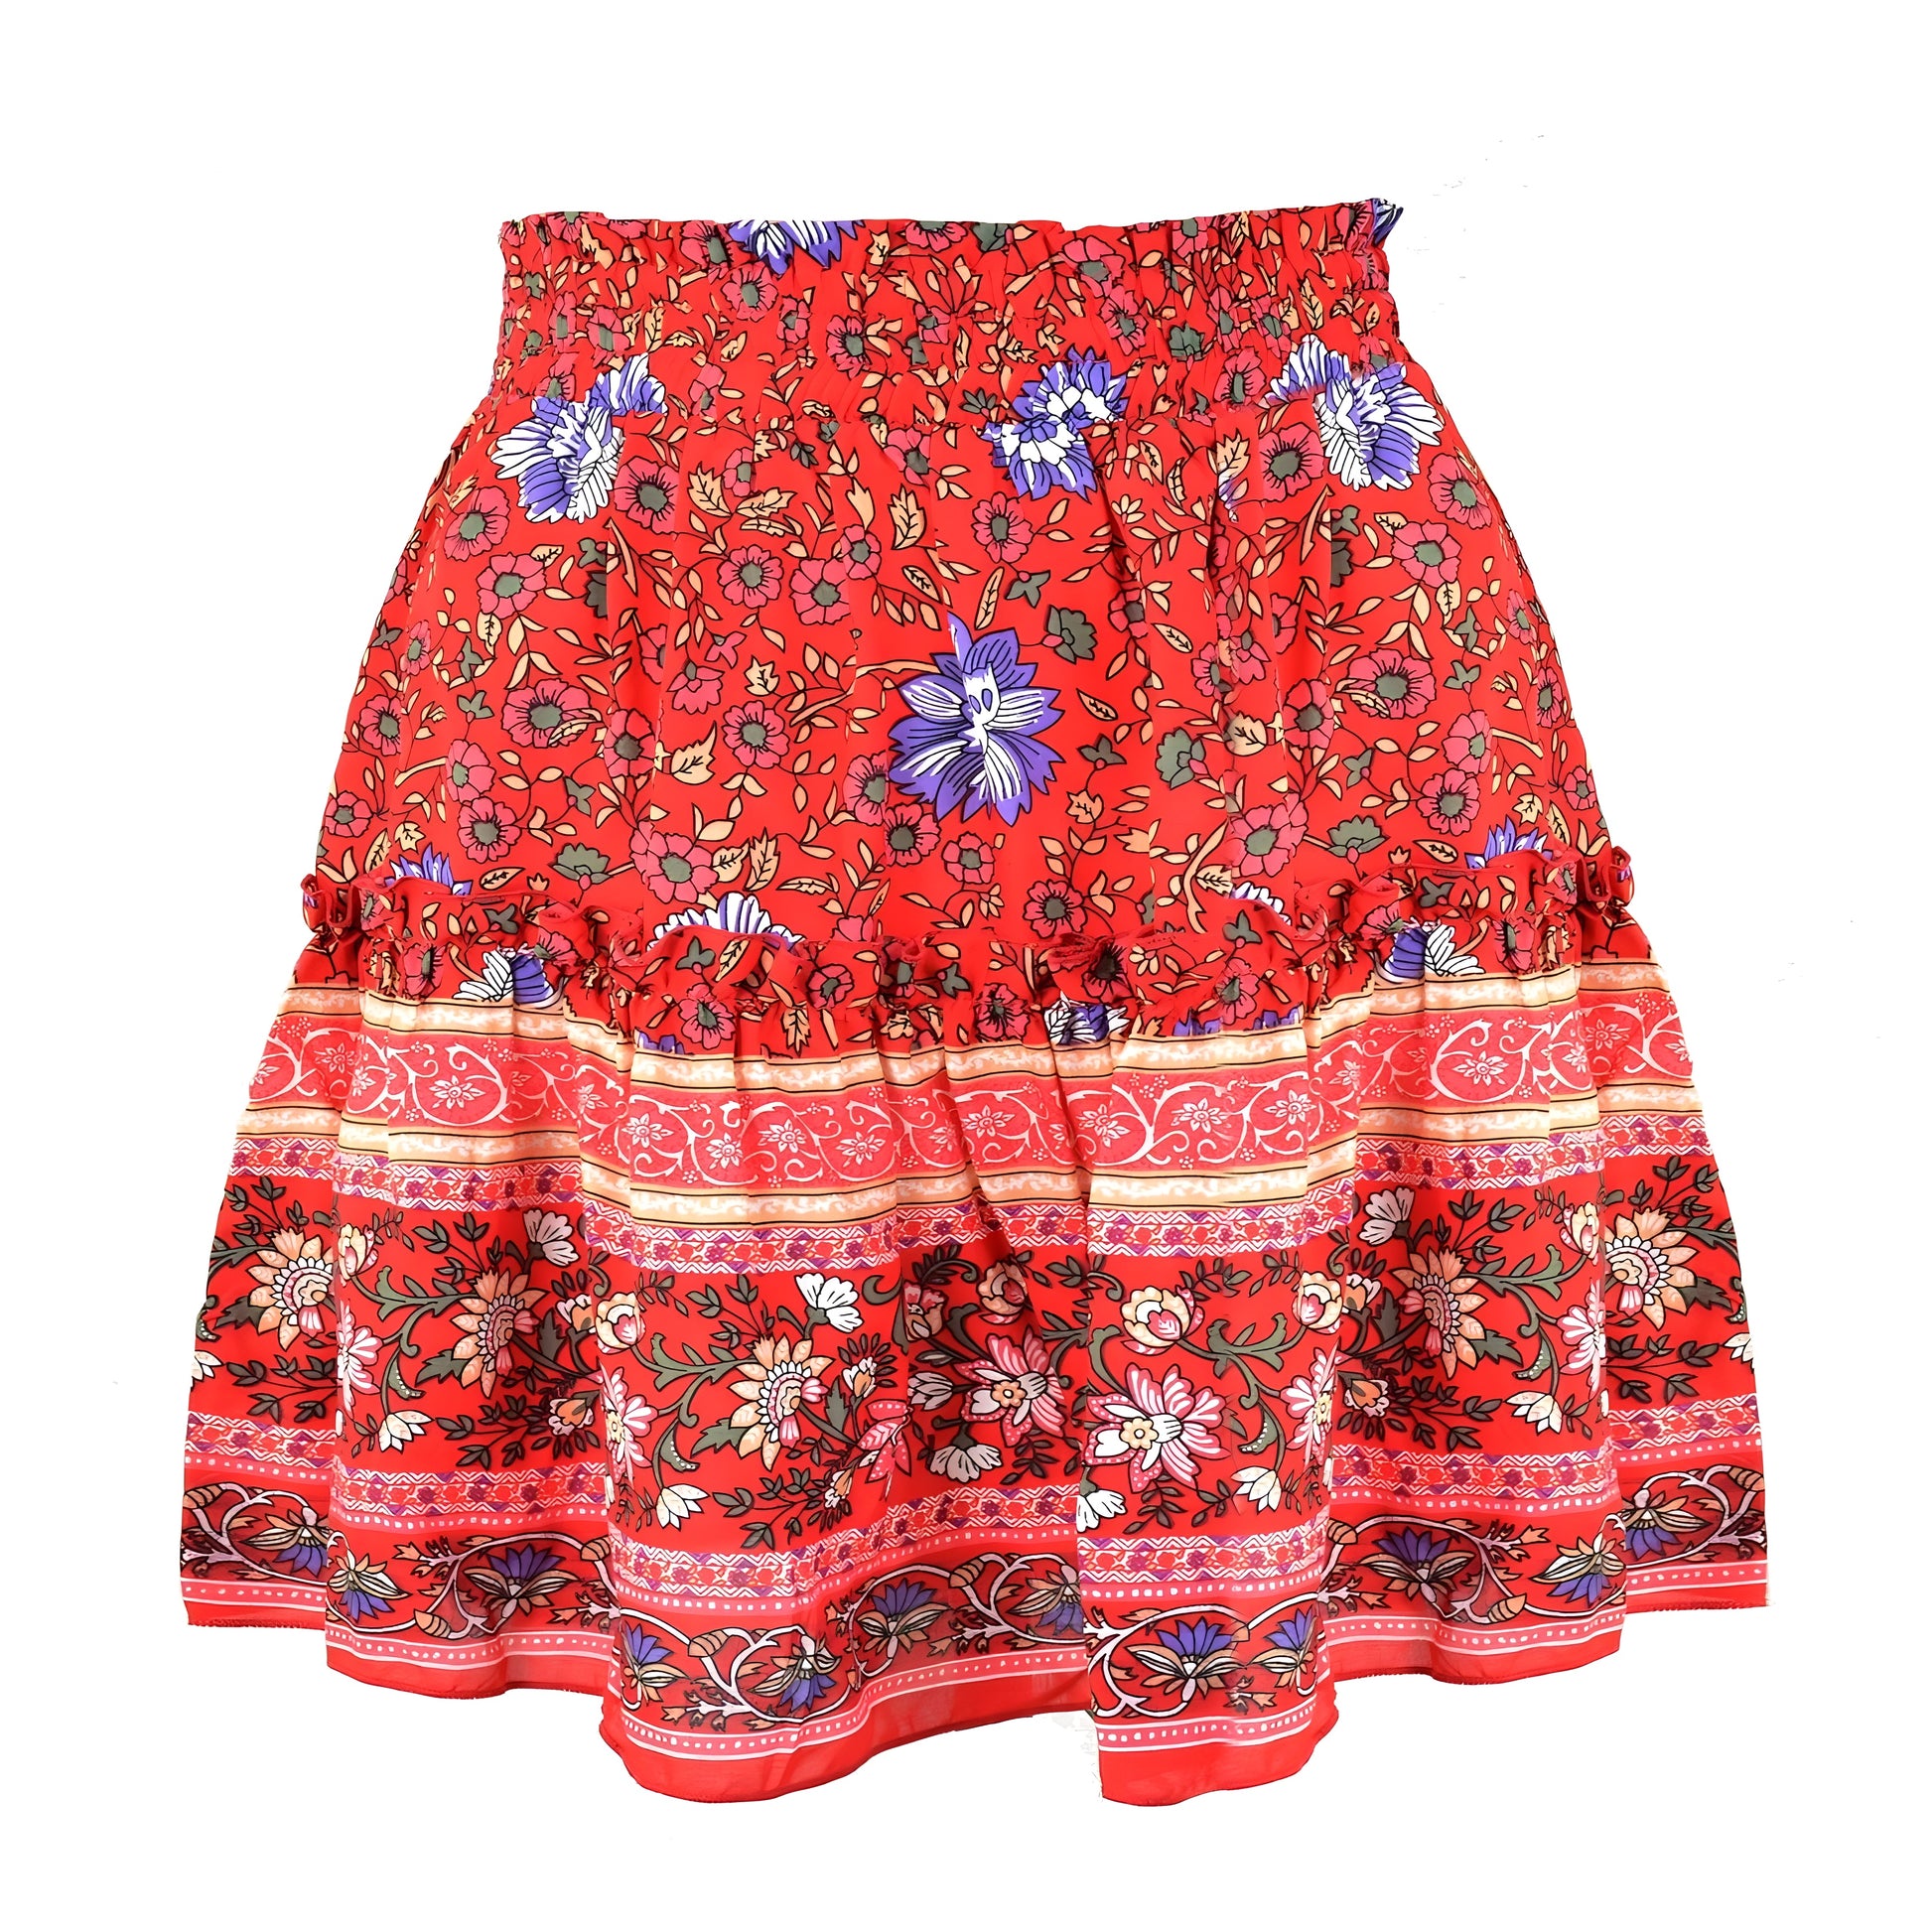 floral-print-red-pink-purple-multi-color-flower-patterned-design-skirt-mini-short-layered-ruffle-trim-high-waist-rise-flowy-spring-2024-summer-preppy-style-chic-trendy-tropical-beach-island-vacation-european-hawaiian-party-women-ladies-girls